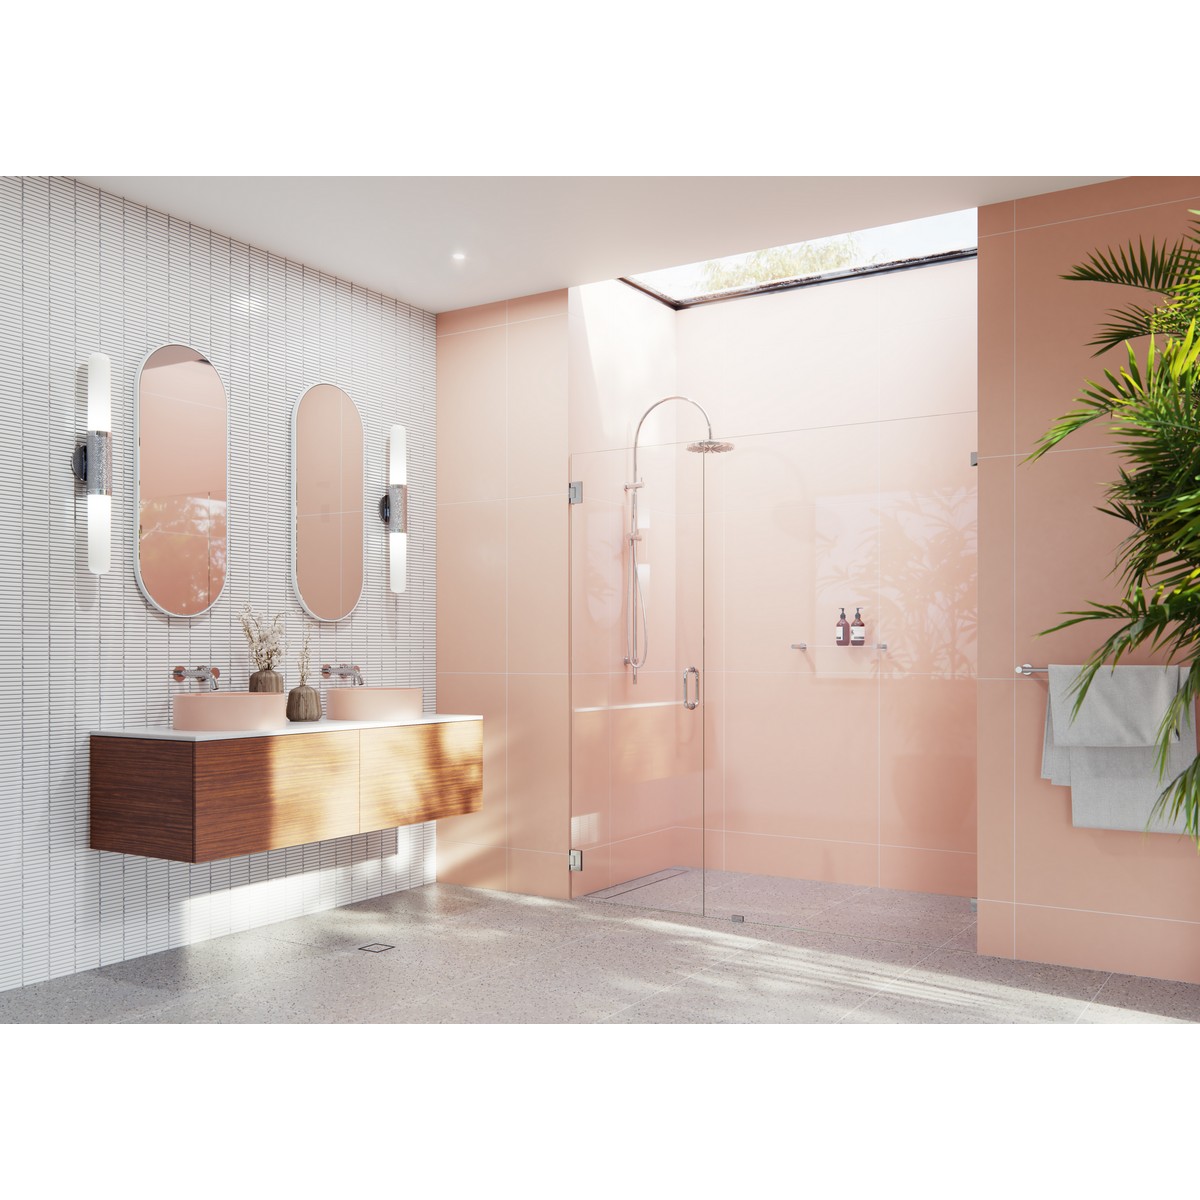 GLASS WAREHOUSE GW-WH-66.75 ILLUME 66 3/4 W X 78 H WALL HINGED FULLY FRAMELESS GLASS SHOWER ENCLOSURE